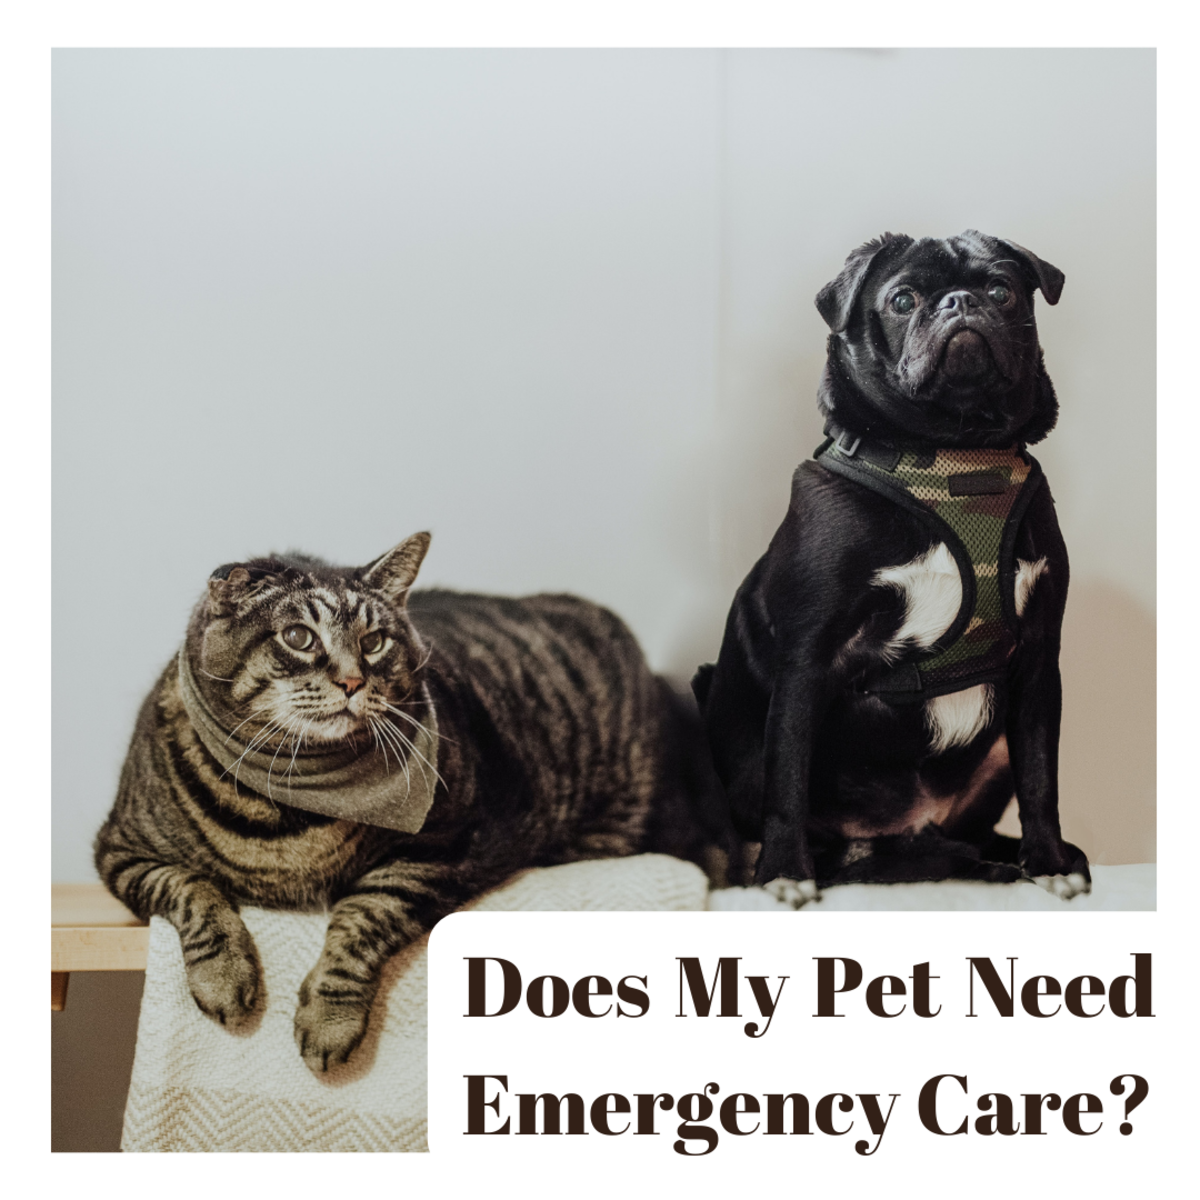 What Is a Veterinary Emergency?